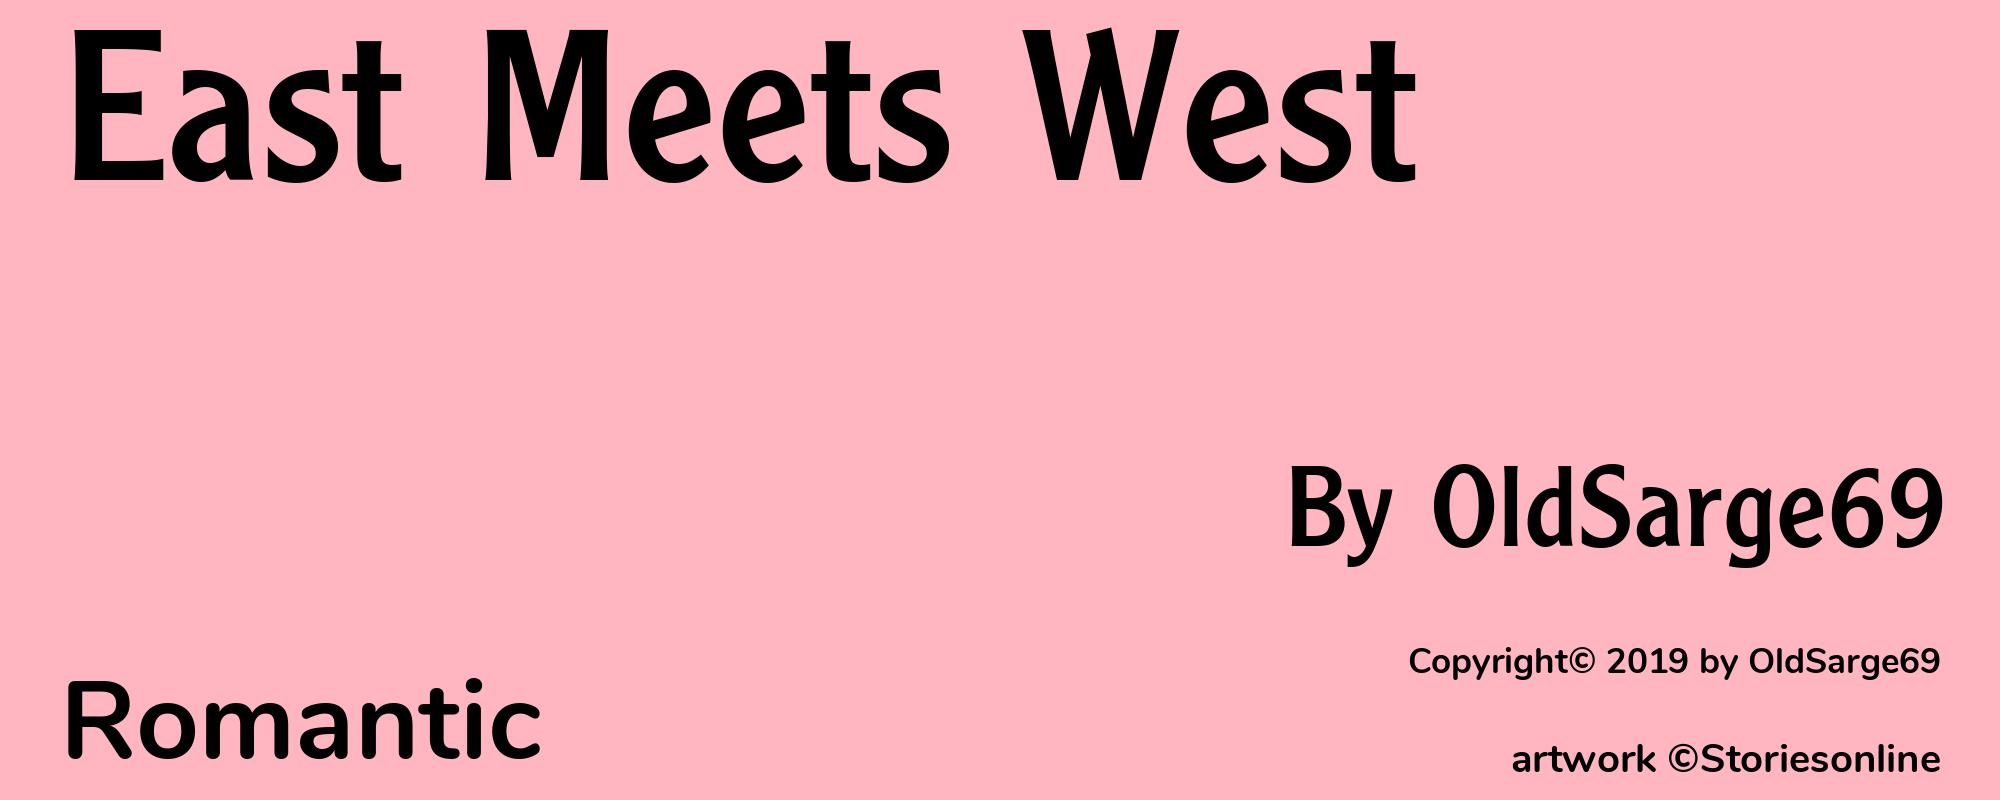 East Meets West - Cover